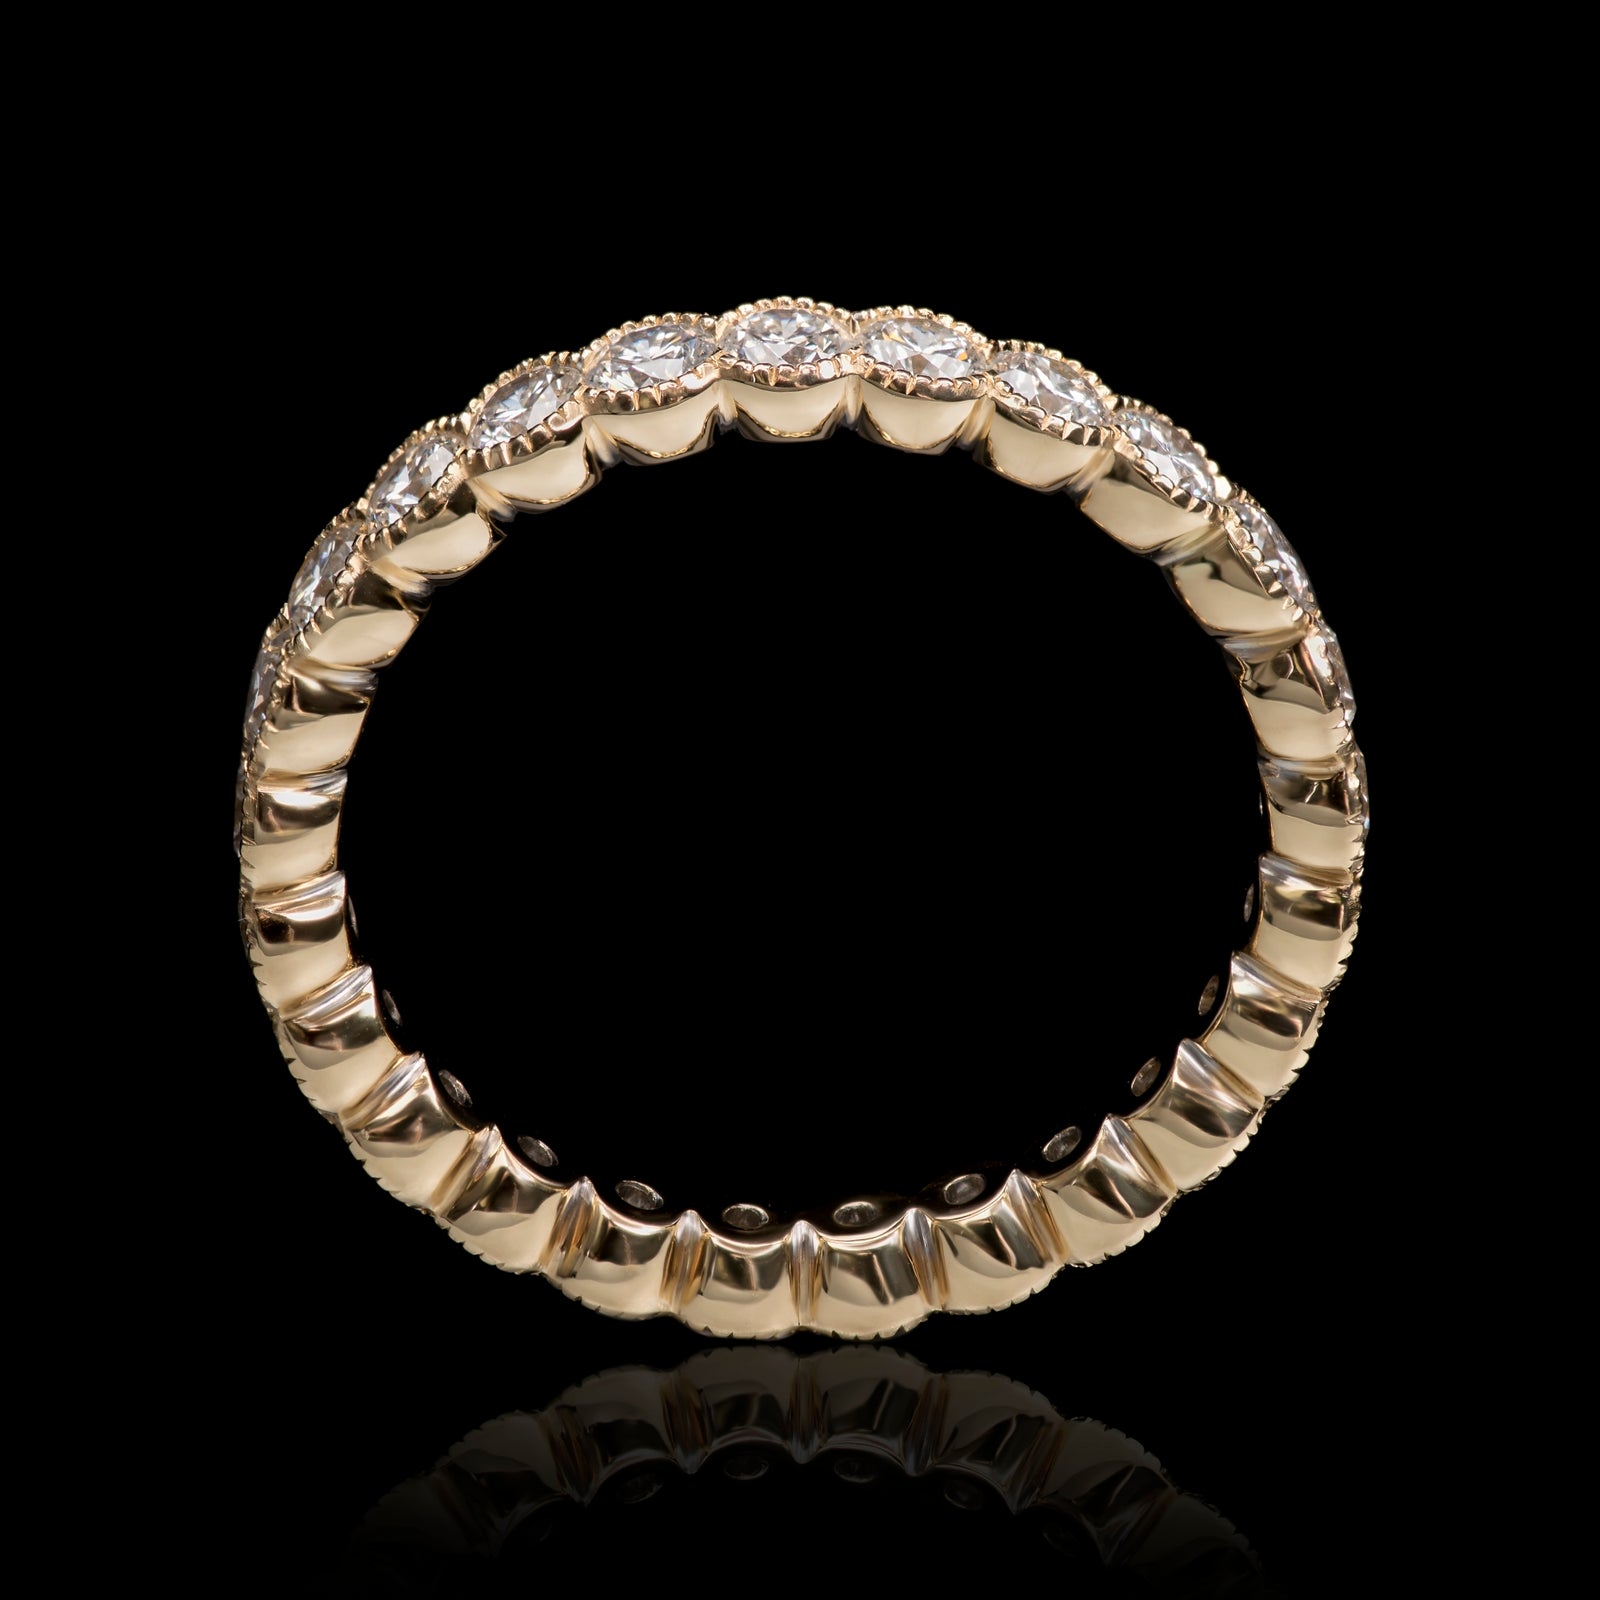 A Diamond Full Eternity Ring with Scalloped Edges, All 18 Carat Yellow Gold